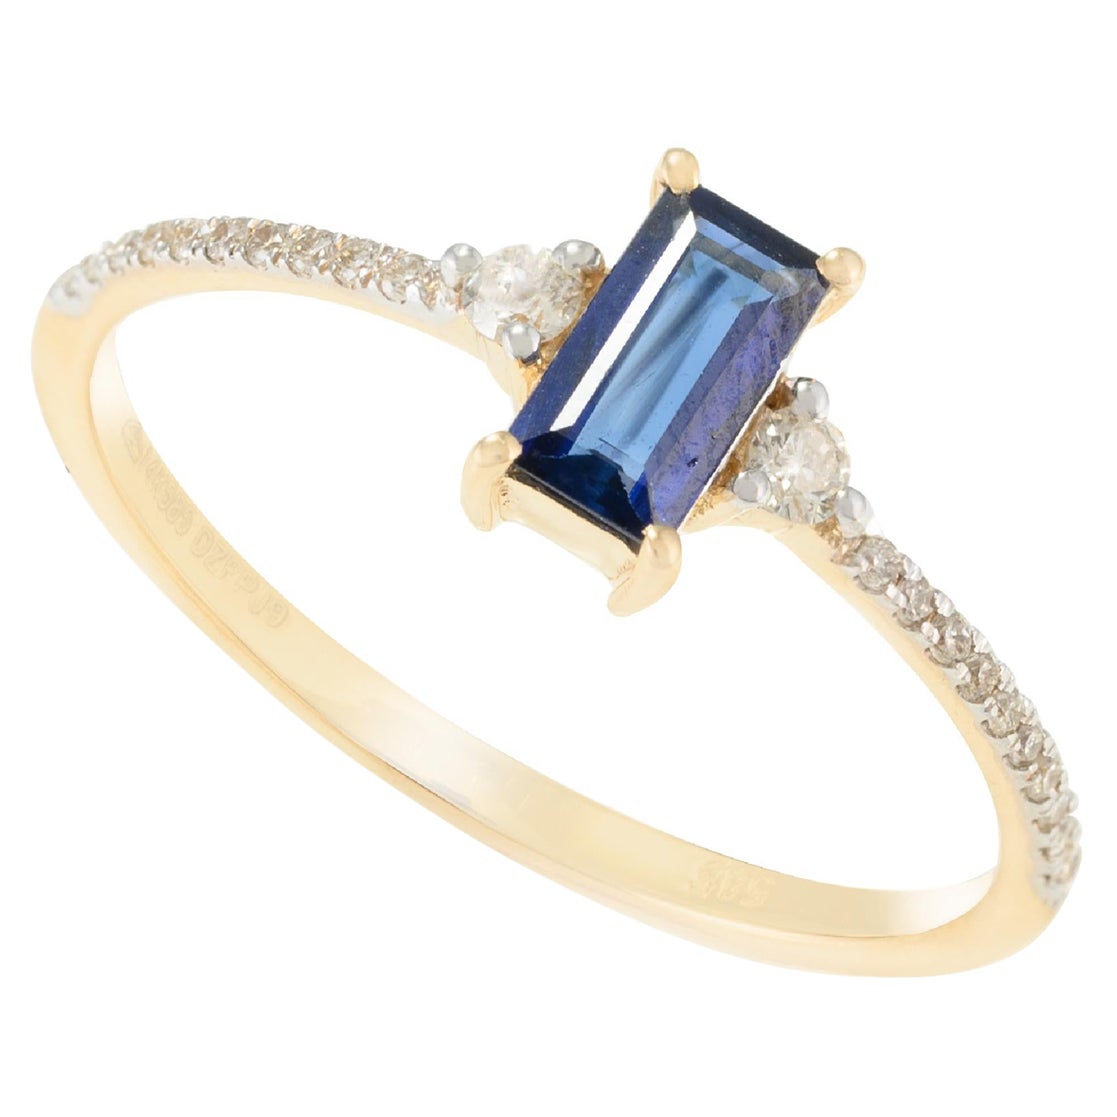 For Sale:  Baguette Blue Sapphire Diamond Everyday Ring in 14k Solid Yellow Gold